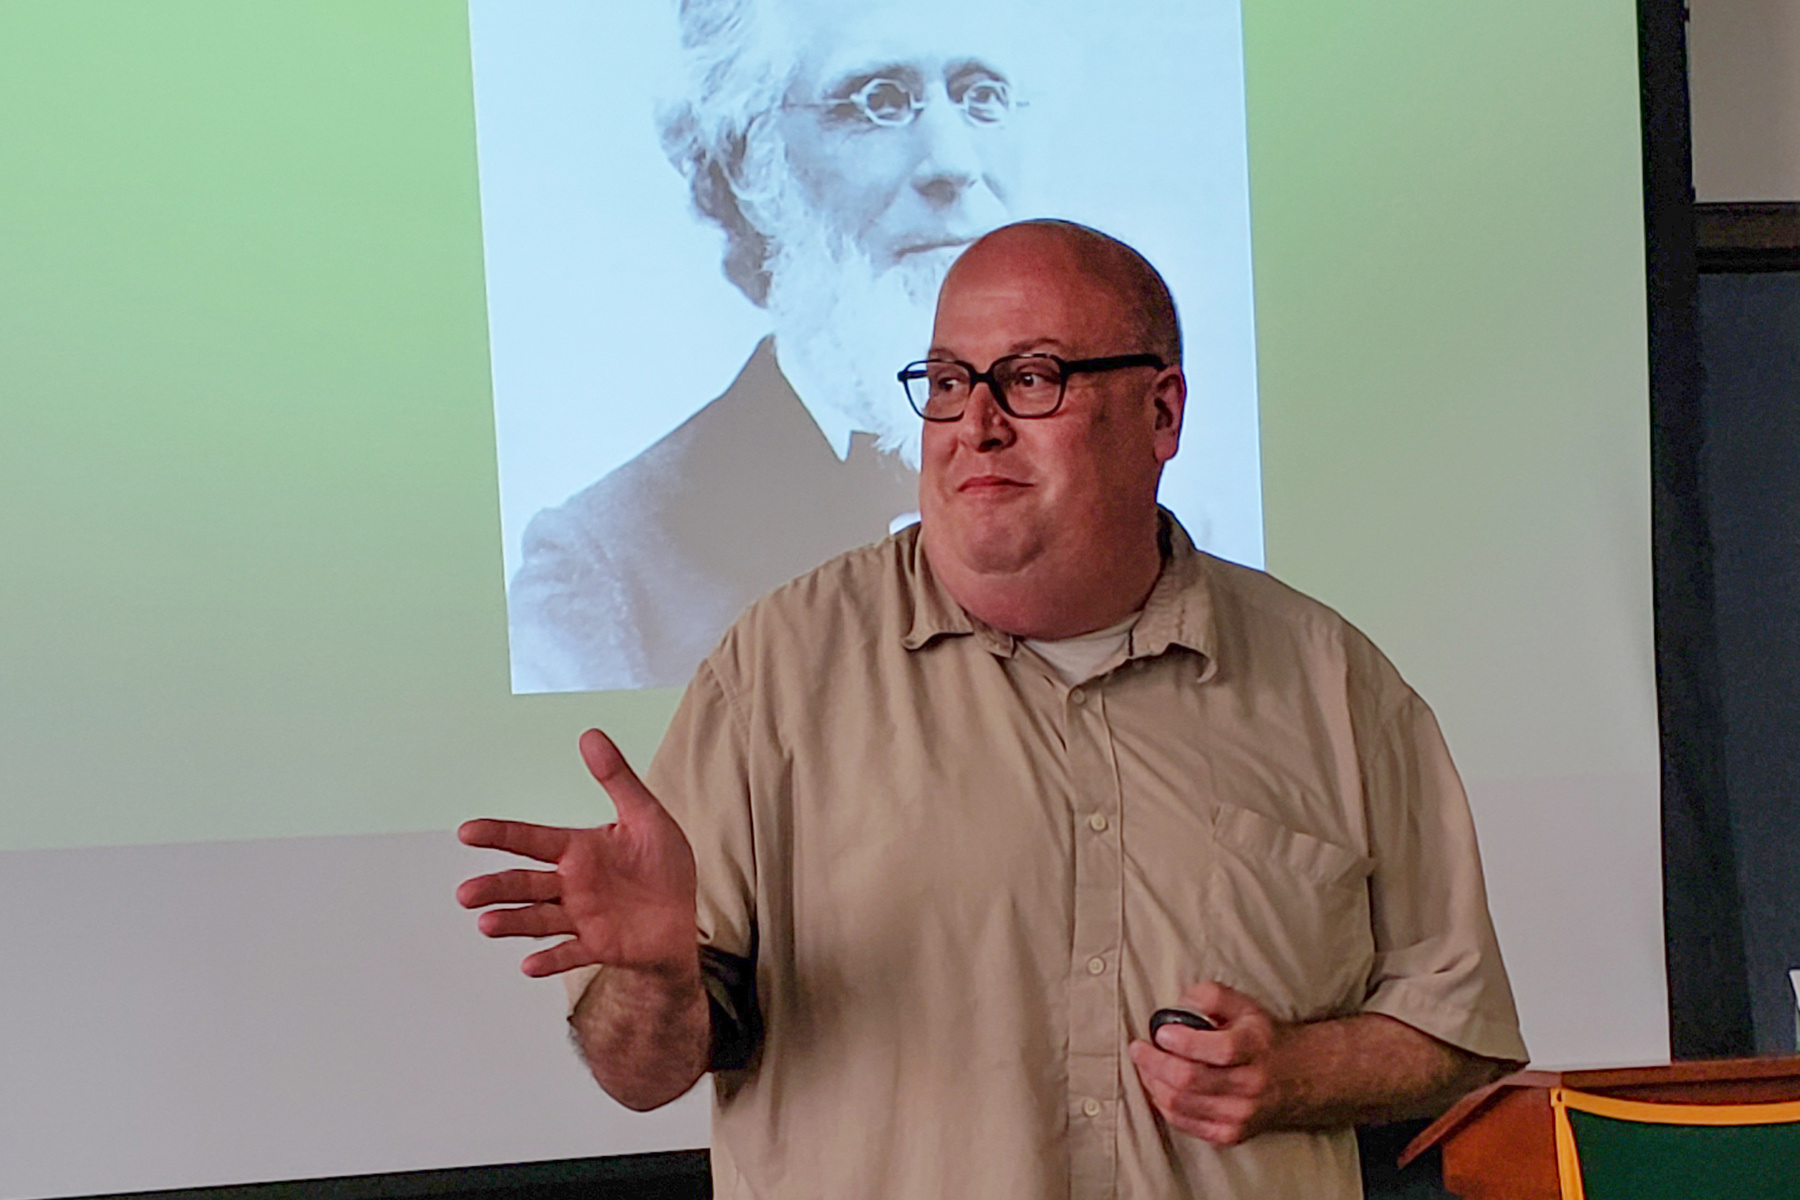 Don Little '91 M'94 M'15, a Syracuse City school district teacher, presented the history of SUNY Oswego's founder, Edward Austin Sheldon, and the legacy he left on the world of education. The presentation, an annual part of Alumni Reunion, took in the Sheldon Hall Historic Classroom.